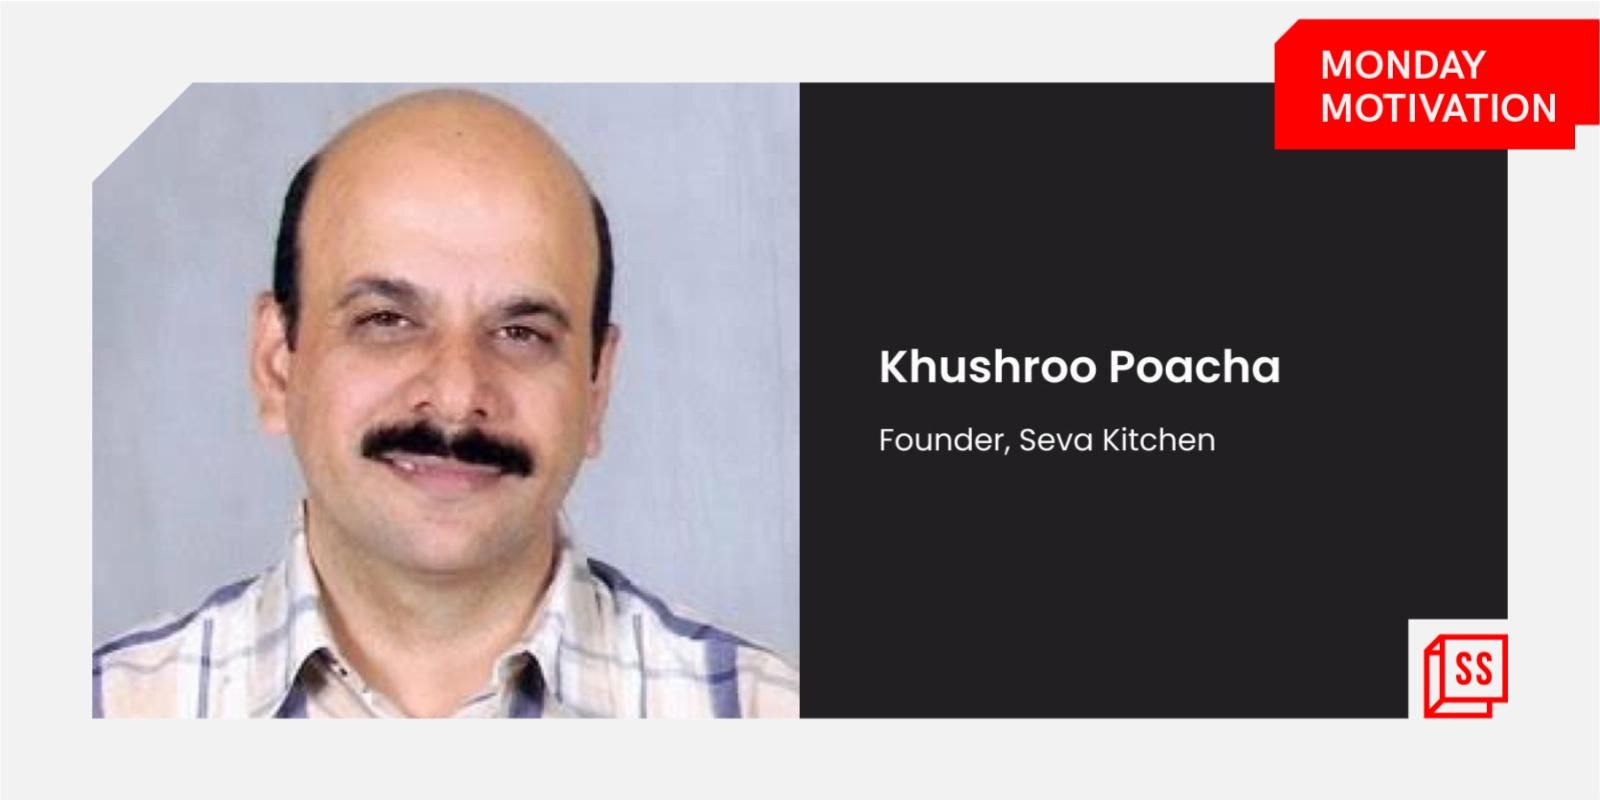 [Monday Motivation] Meet Nagpur’s Khushroo Poacha, who is feeding underprivileged patients for free